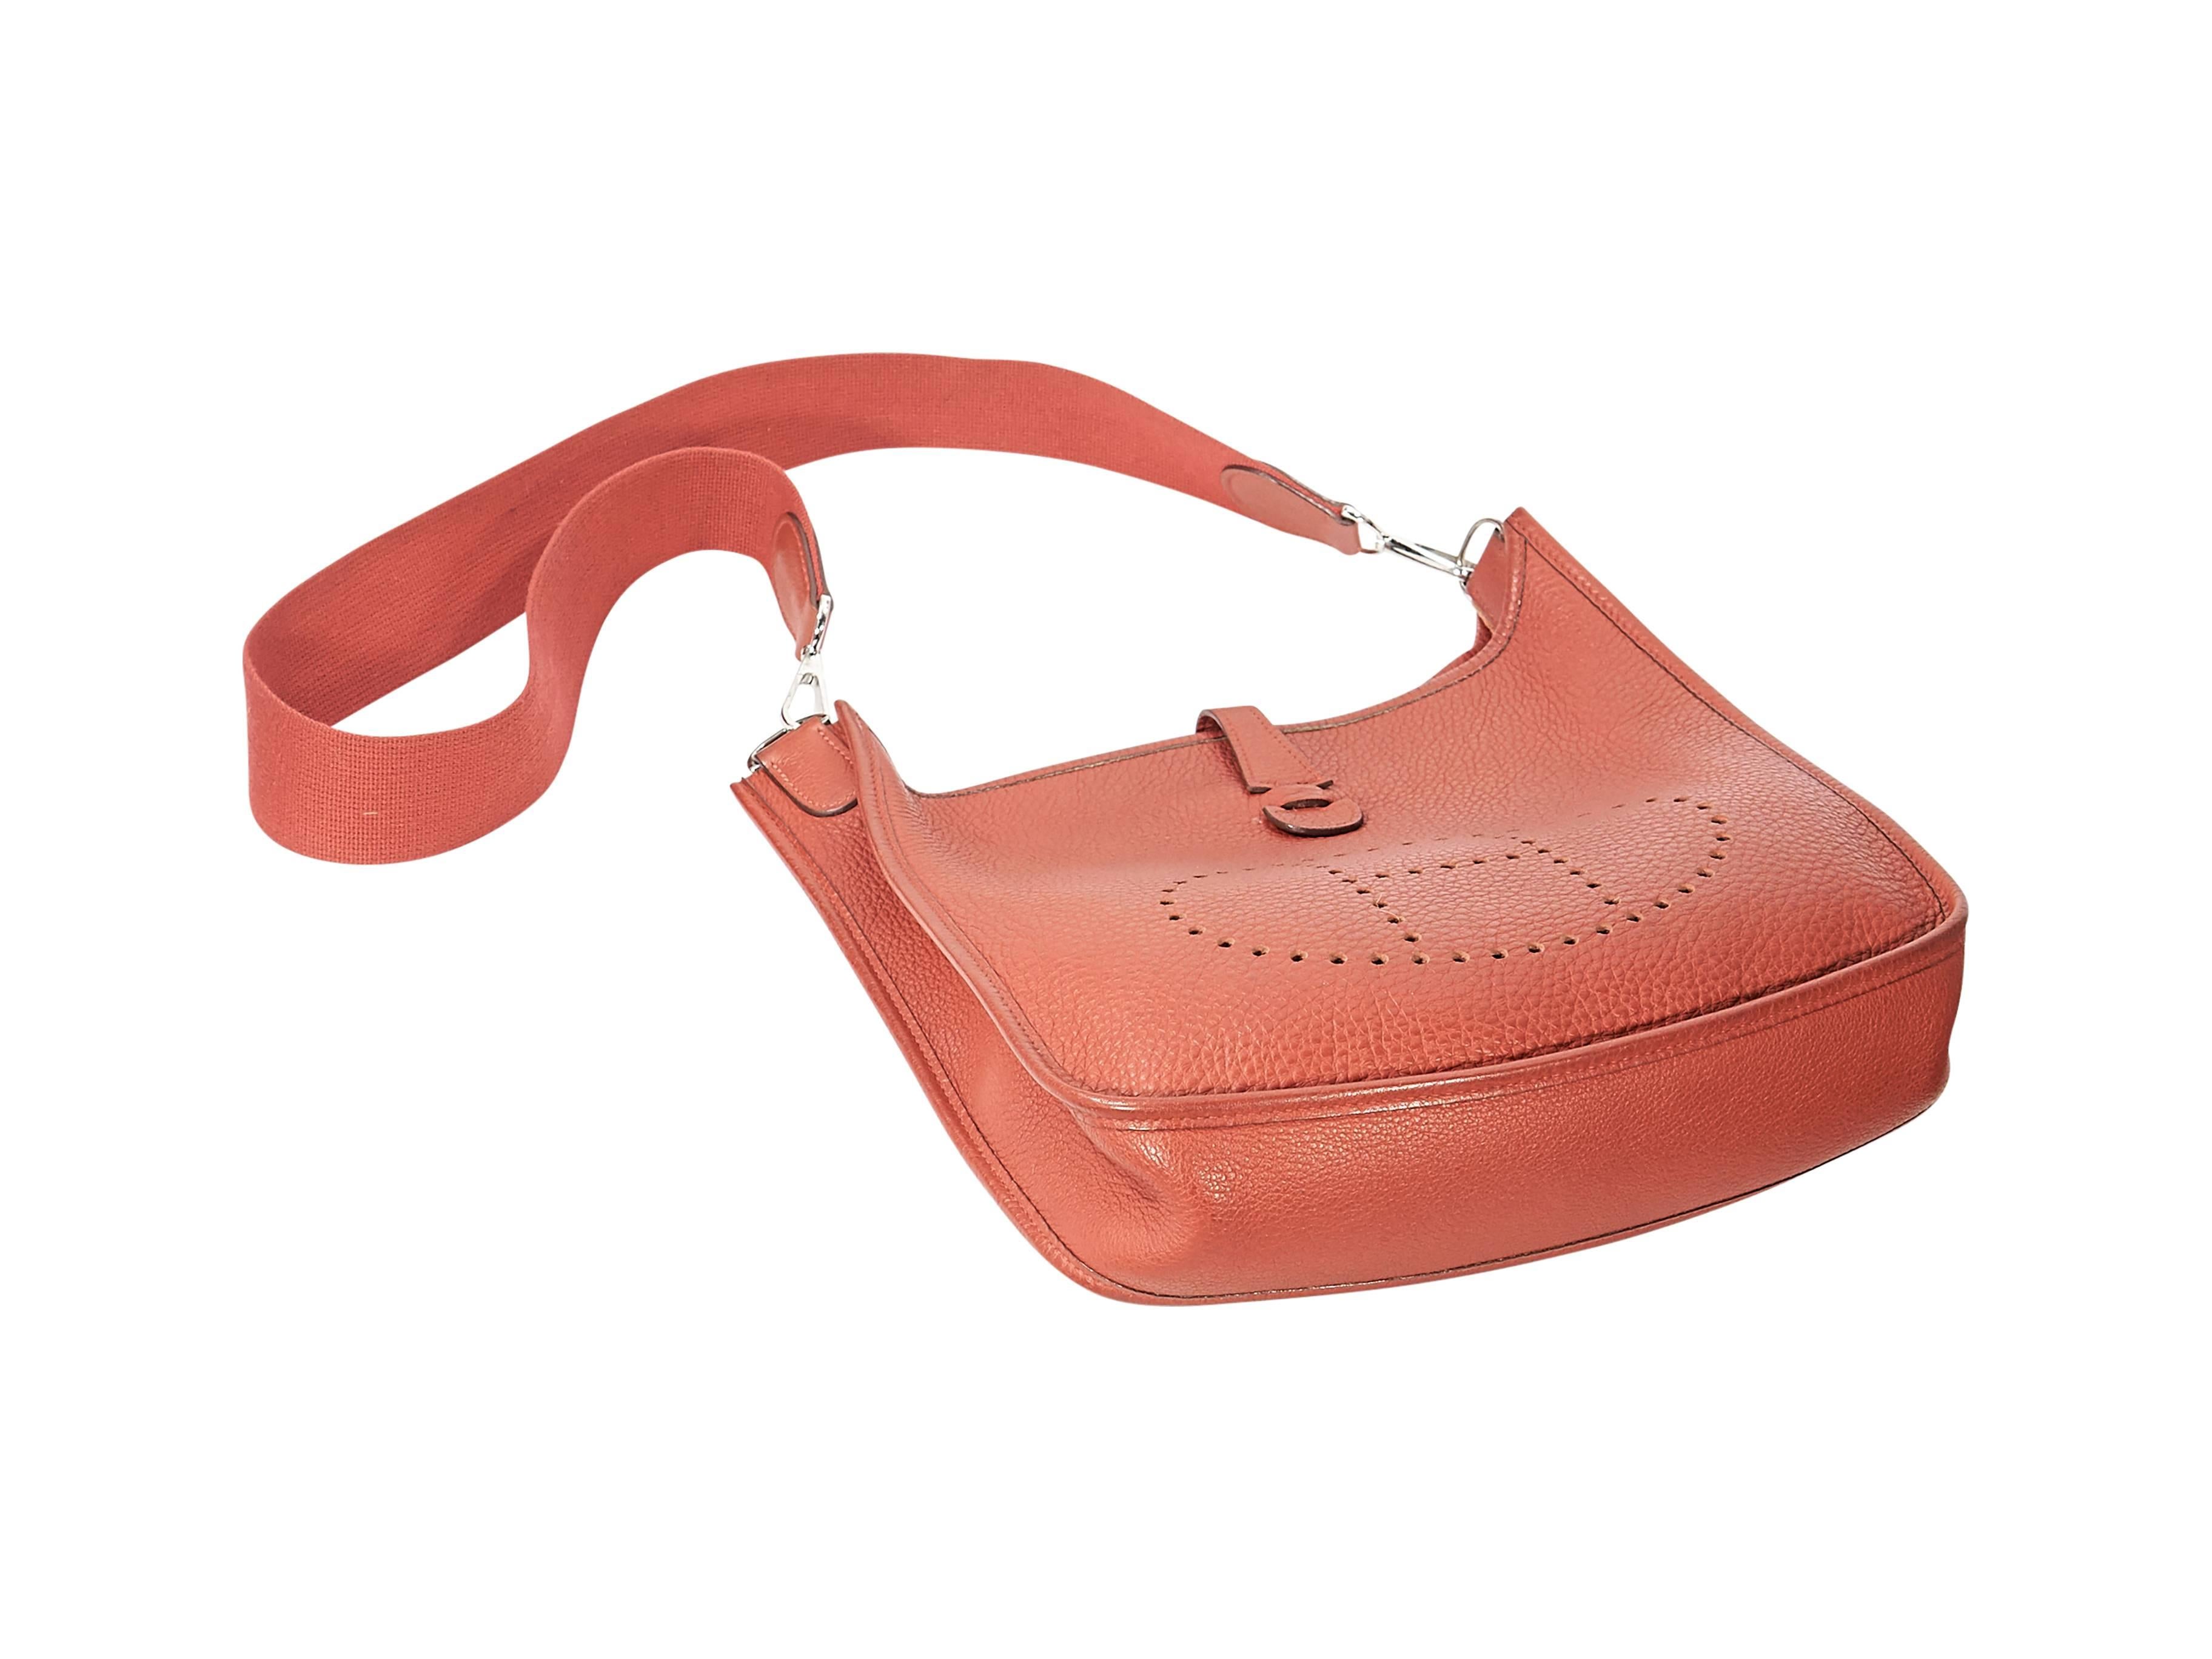 Product details: Red pebbled leather Evelyne III PM bag by Hermes. Perforated front logo design. Detachable shoulder strap. Top tab closure. Lined interior with inner slide pocket. Palladium-plated hardware. 11.3